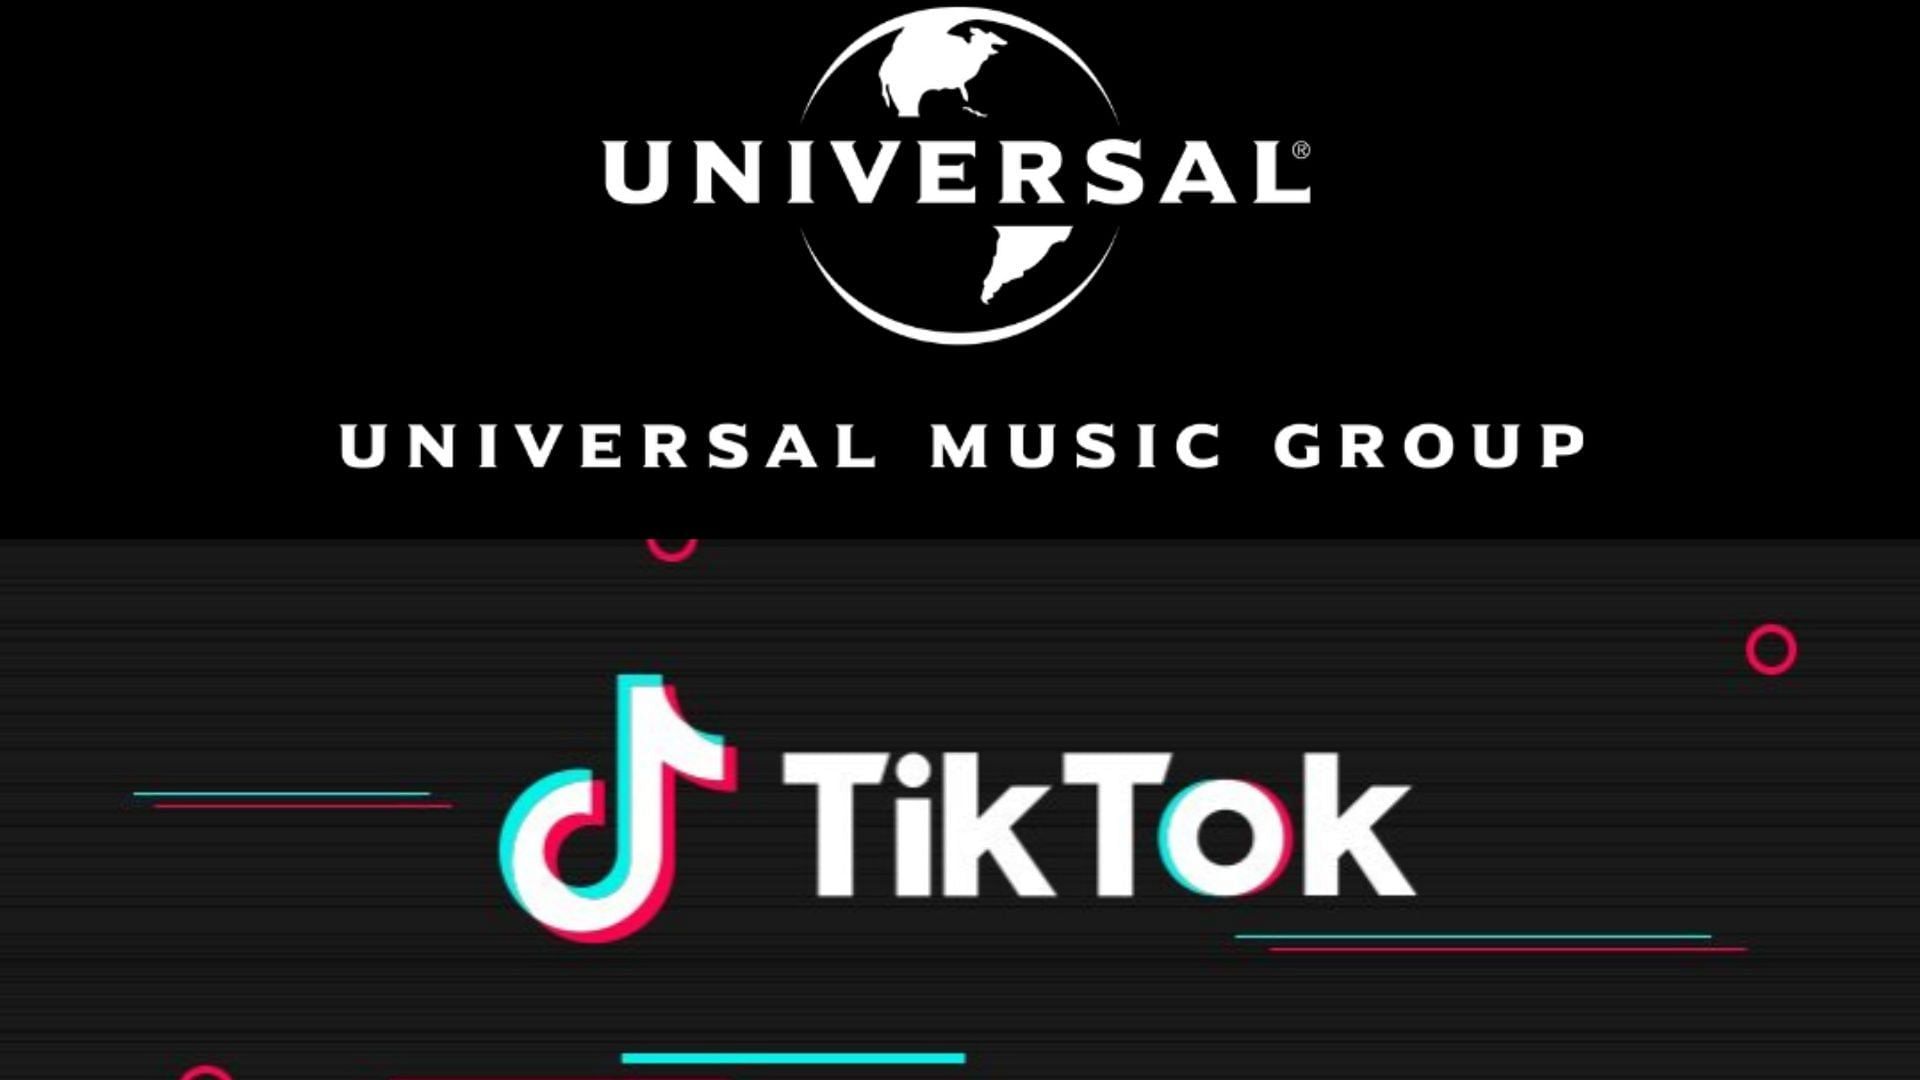 Universal Music Group (UMG) to pull songs catalog from TikTok over license negotiation. (Image via Facebook/Universal Music Group, TikTok)